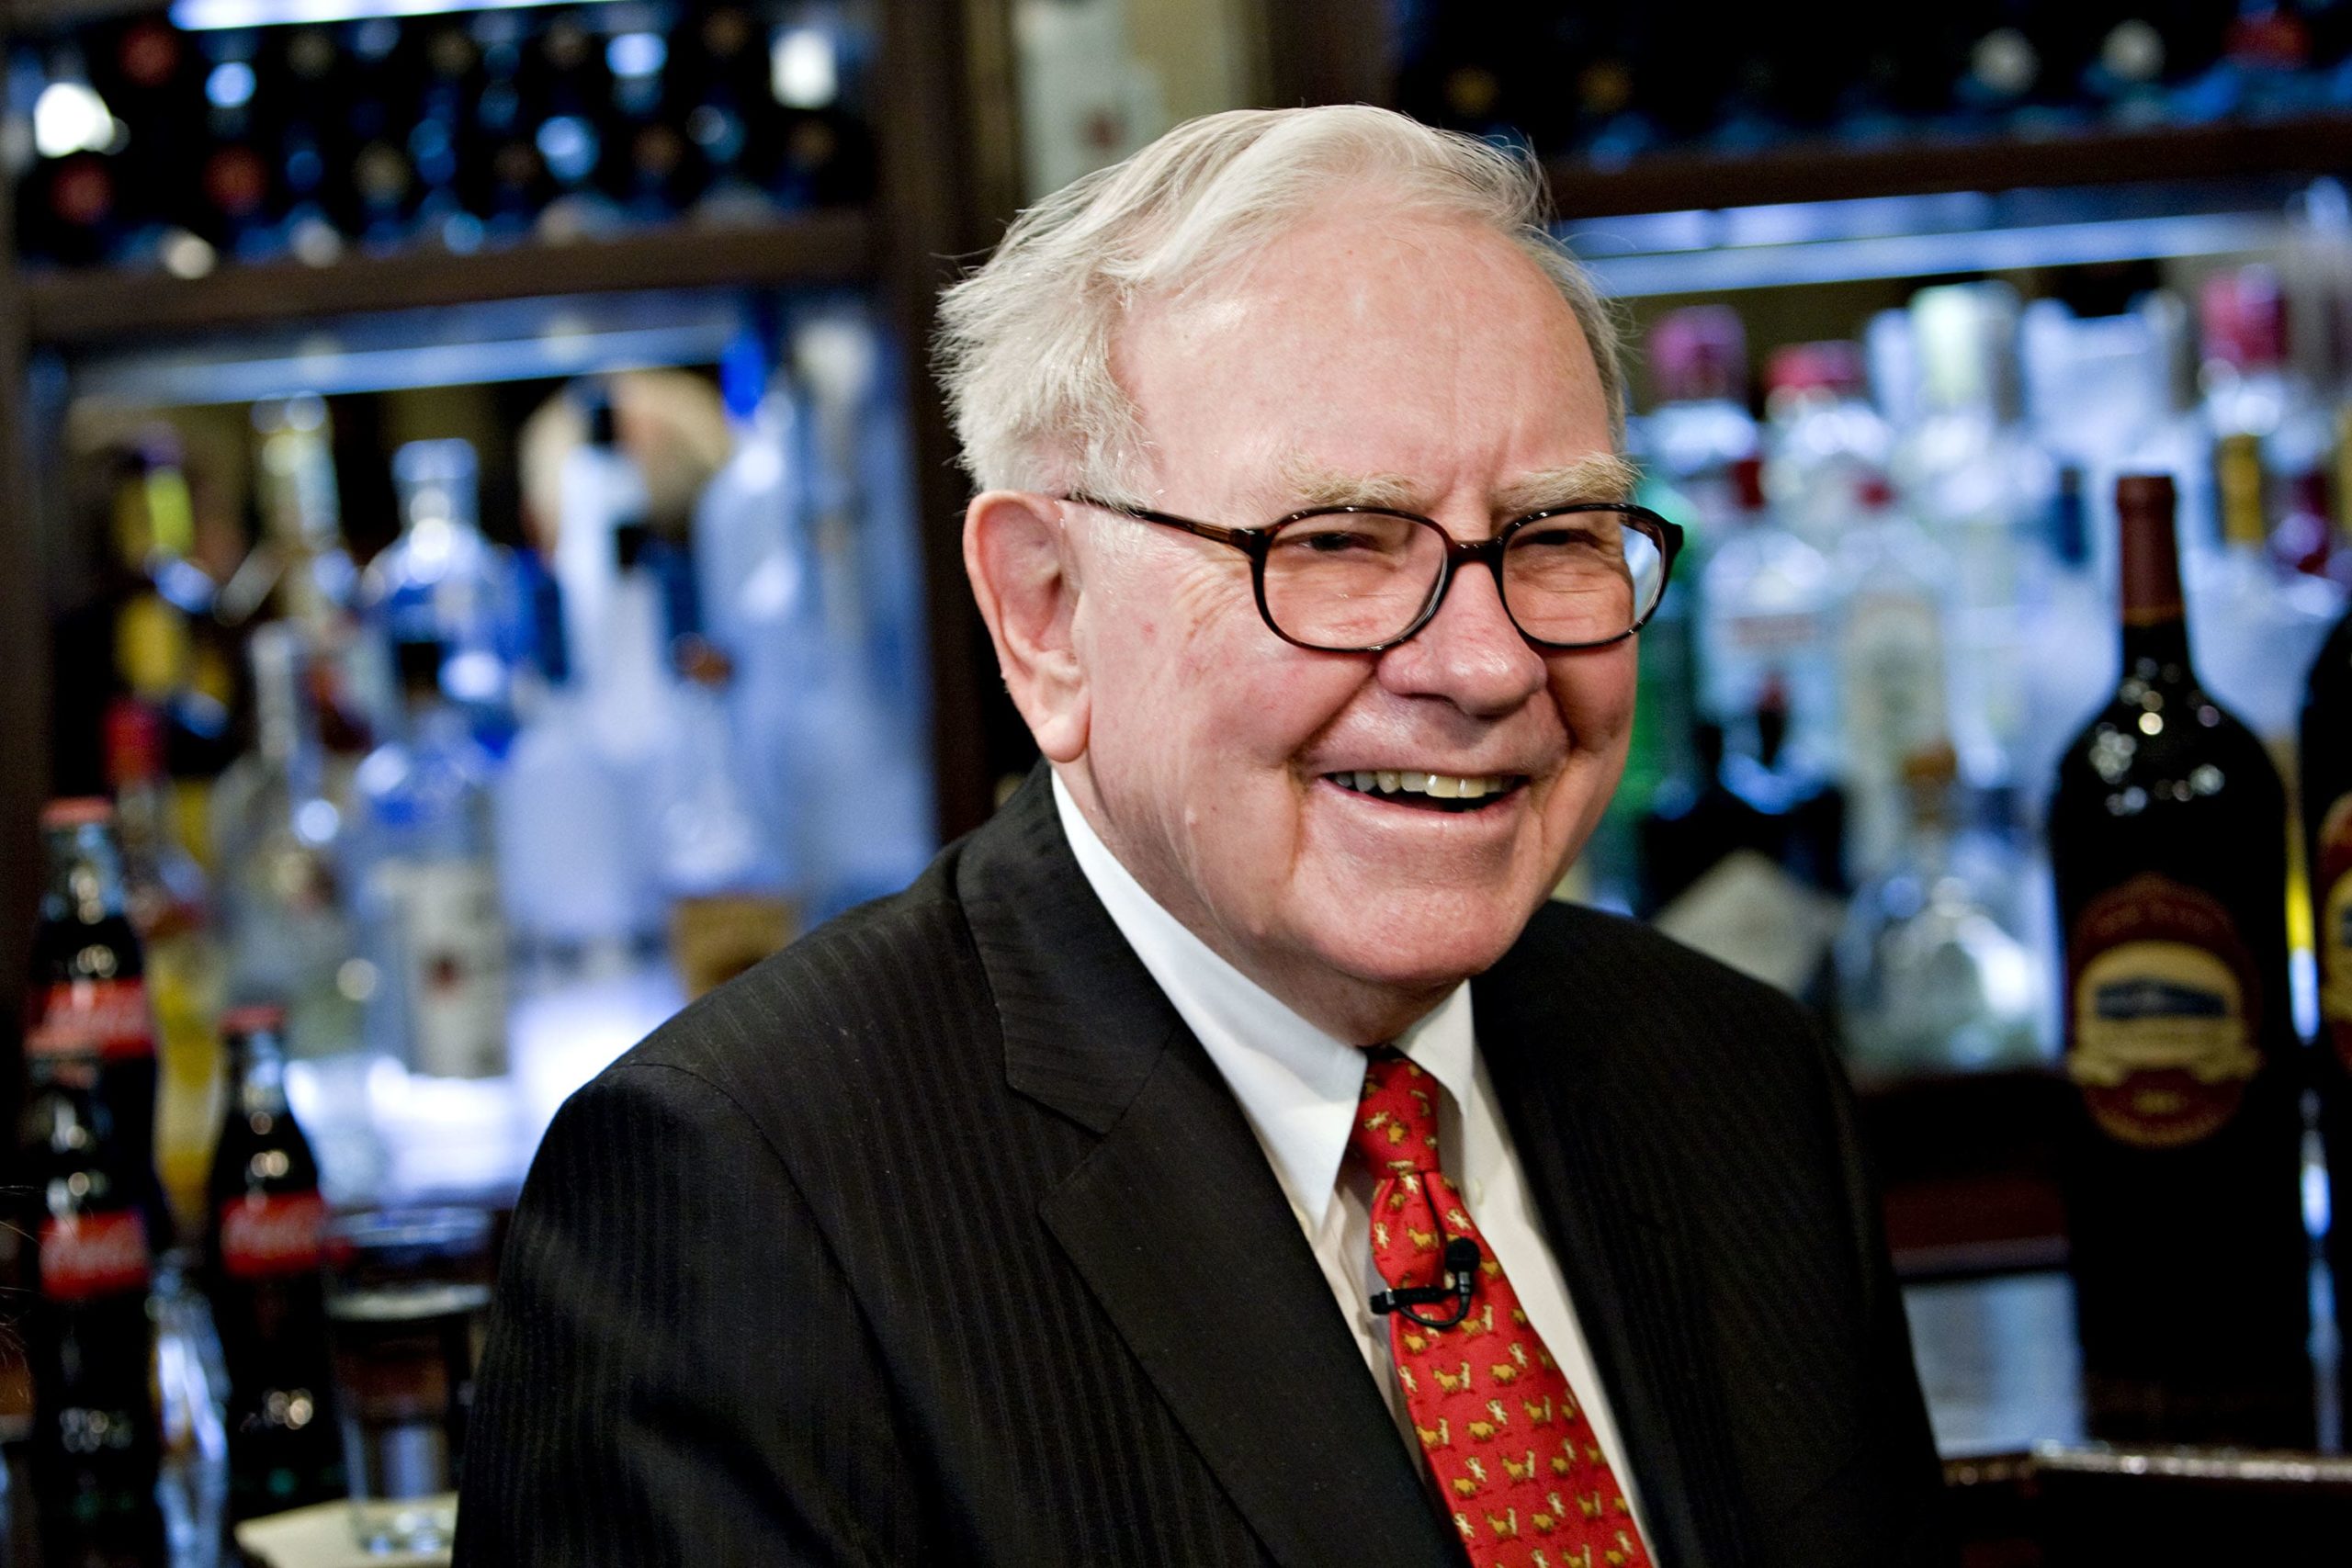 This decade noticed Warren Buffett lastly exit IBM, leap massive into Apple